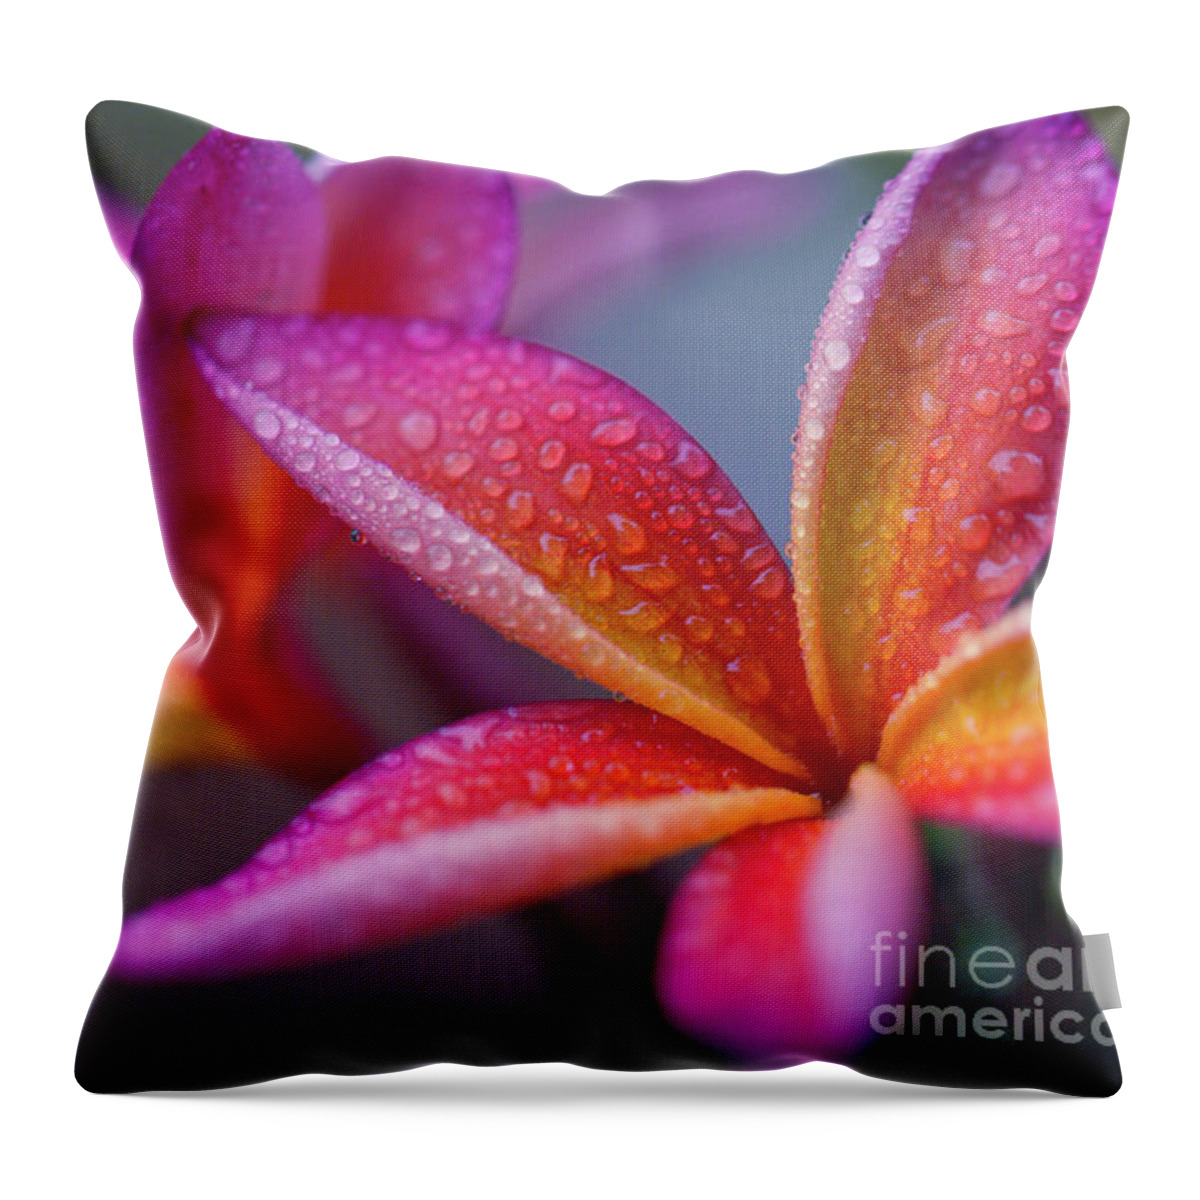 Plumeria Throw Pillow featuring the photograph Windows Into Nature by Sharon Mau